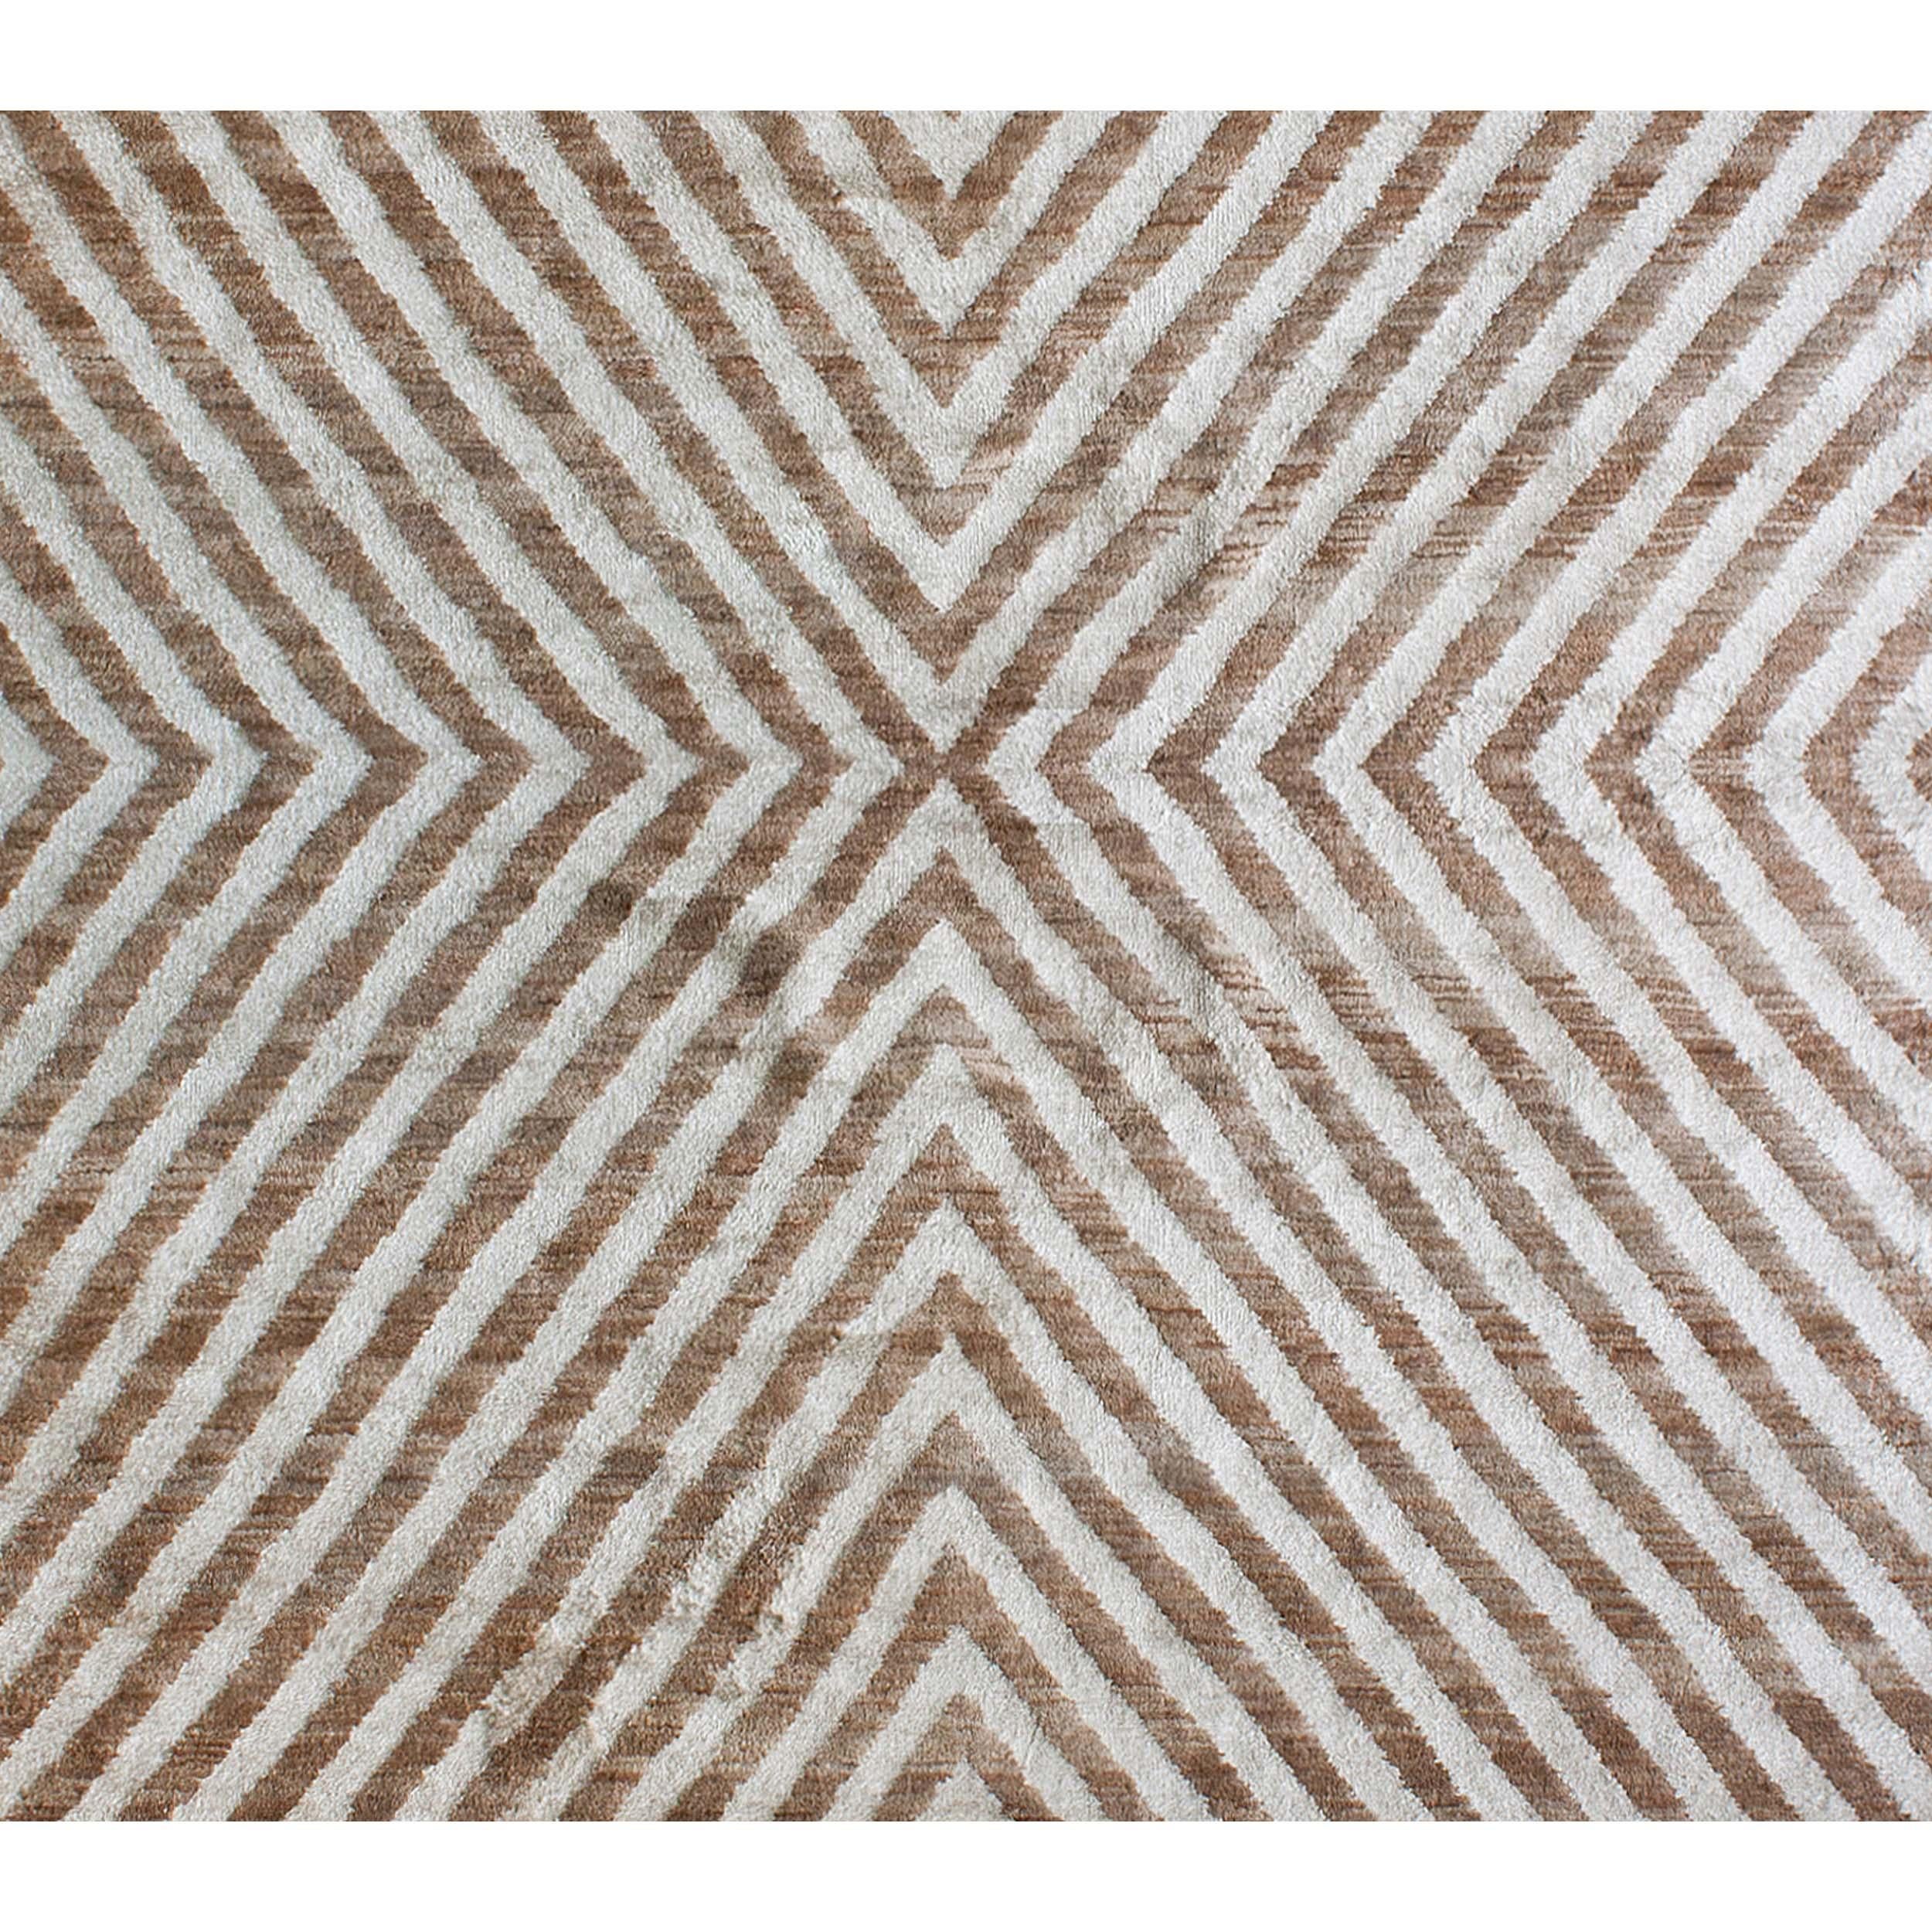 Luxurious modern hand-knotted rug with our meticulously crafted masterpiece. This rug transcends their utilitarian purpose, becoming work of art that delight the senses and seamlessly harmonize with a variety of home decor styles. Meticulously